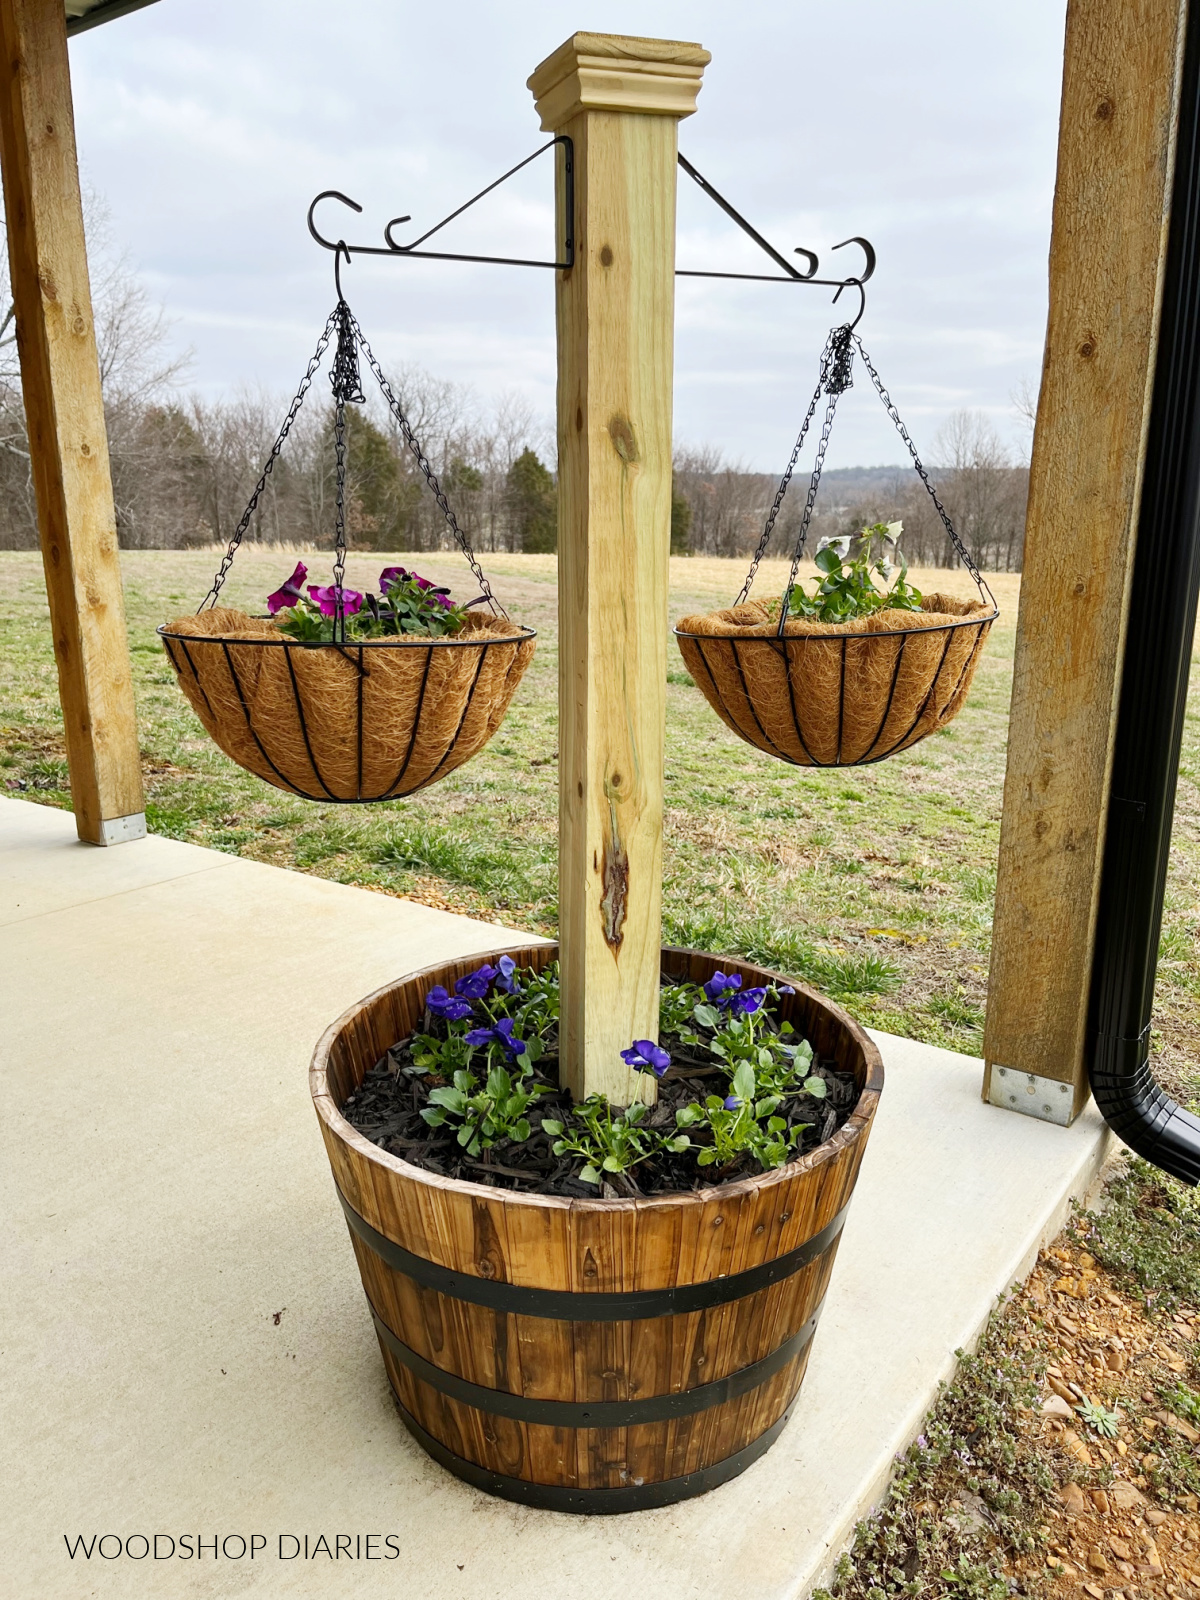 Barrel planter with post and hanging baskets with flowers